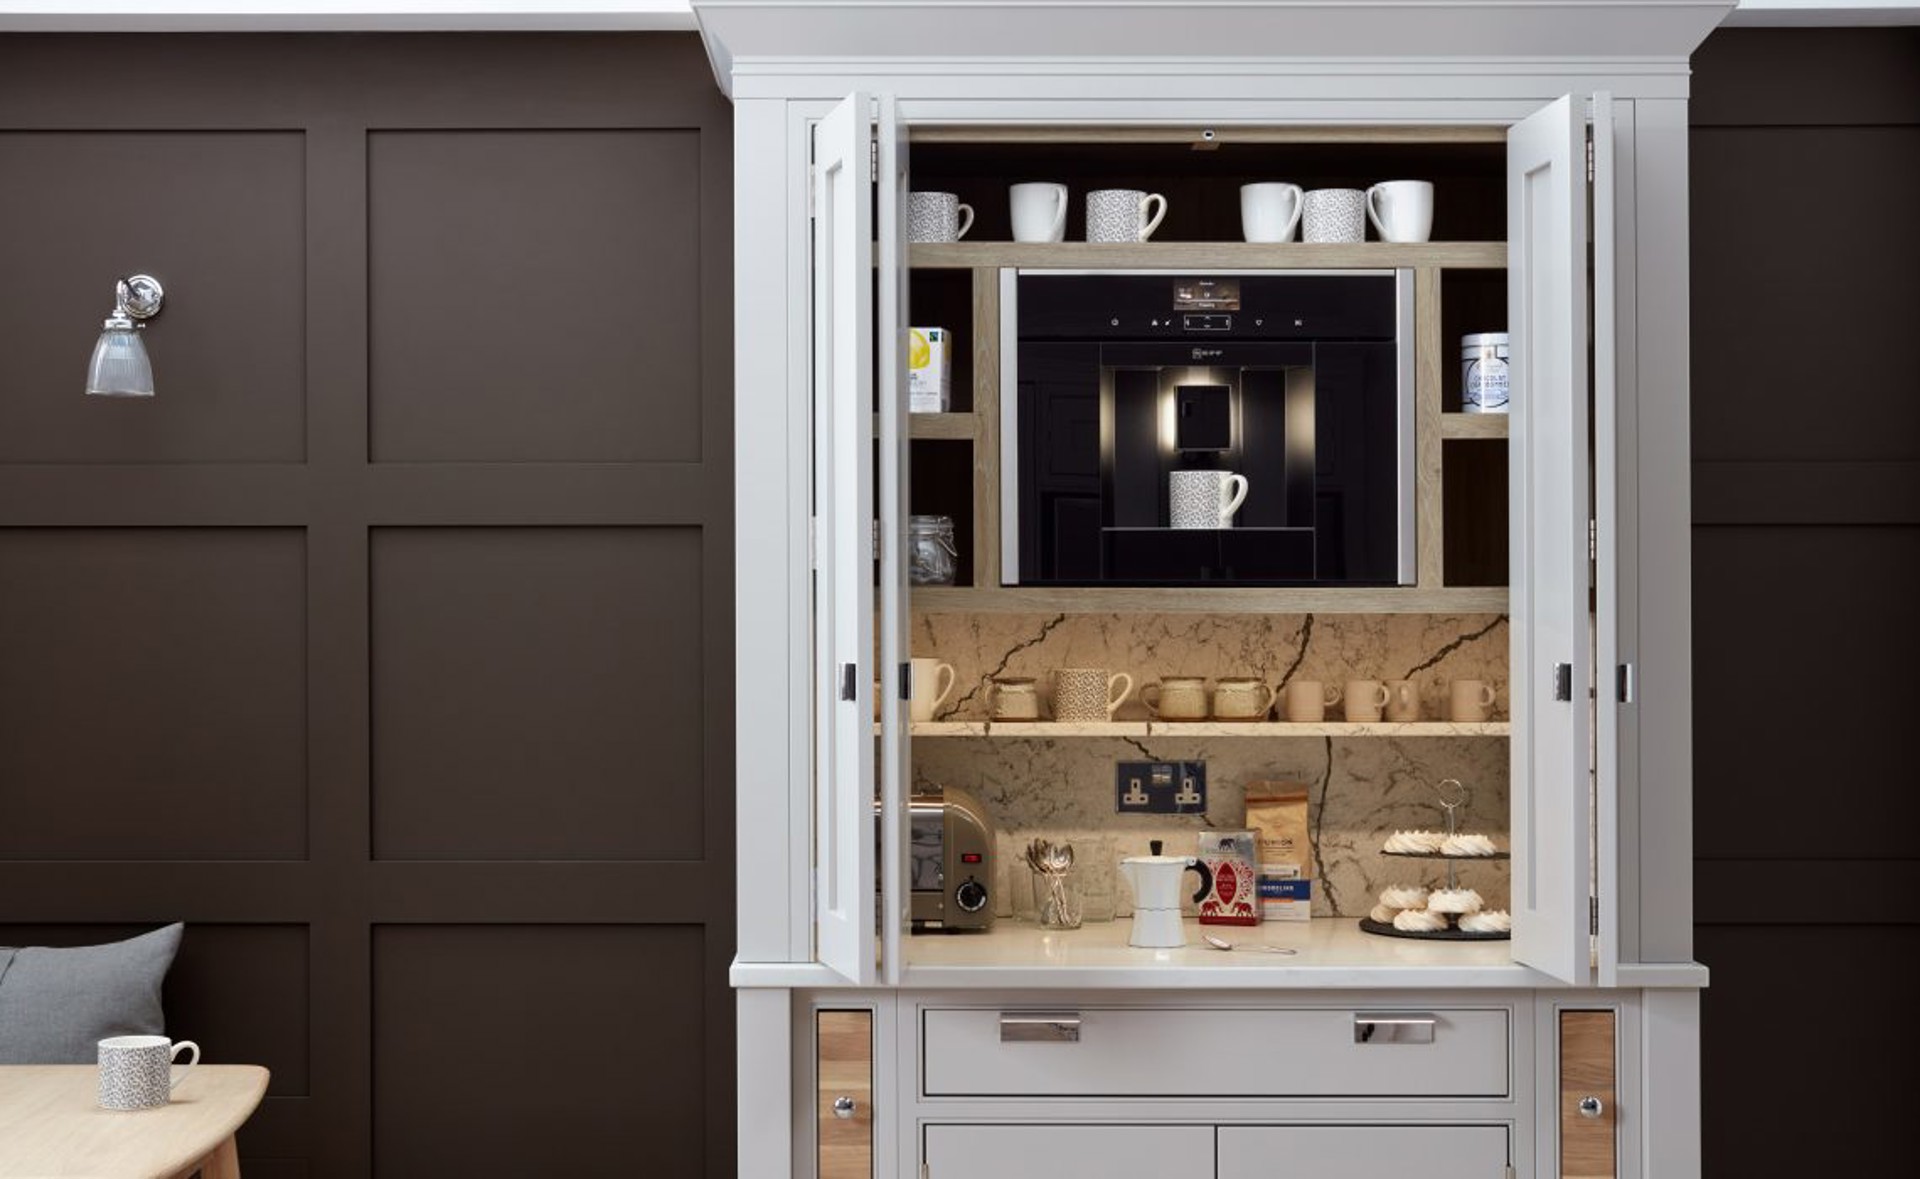 Picking your perfect pantry- The different practical uses of the feature cupboard